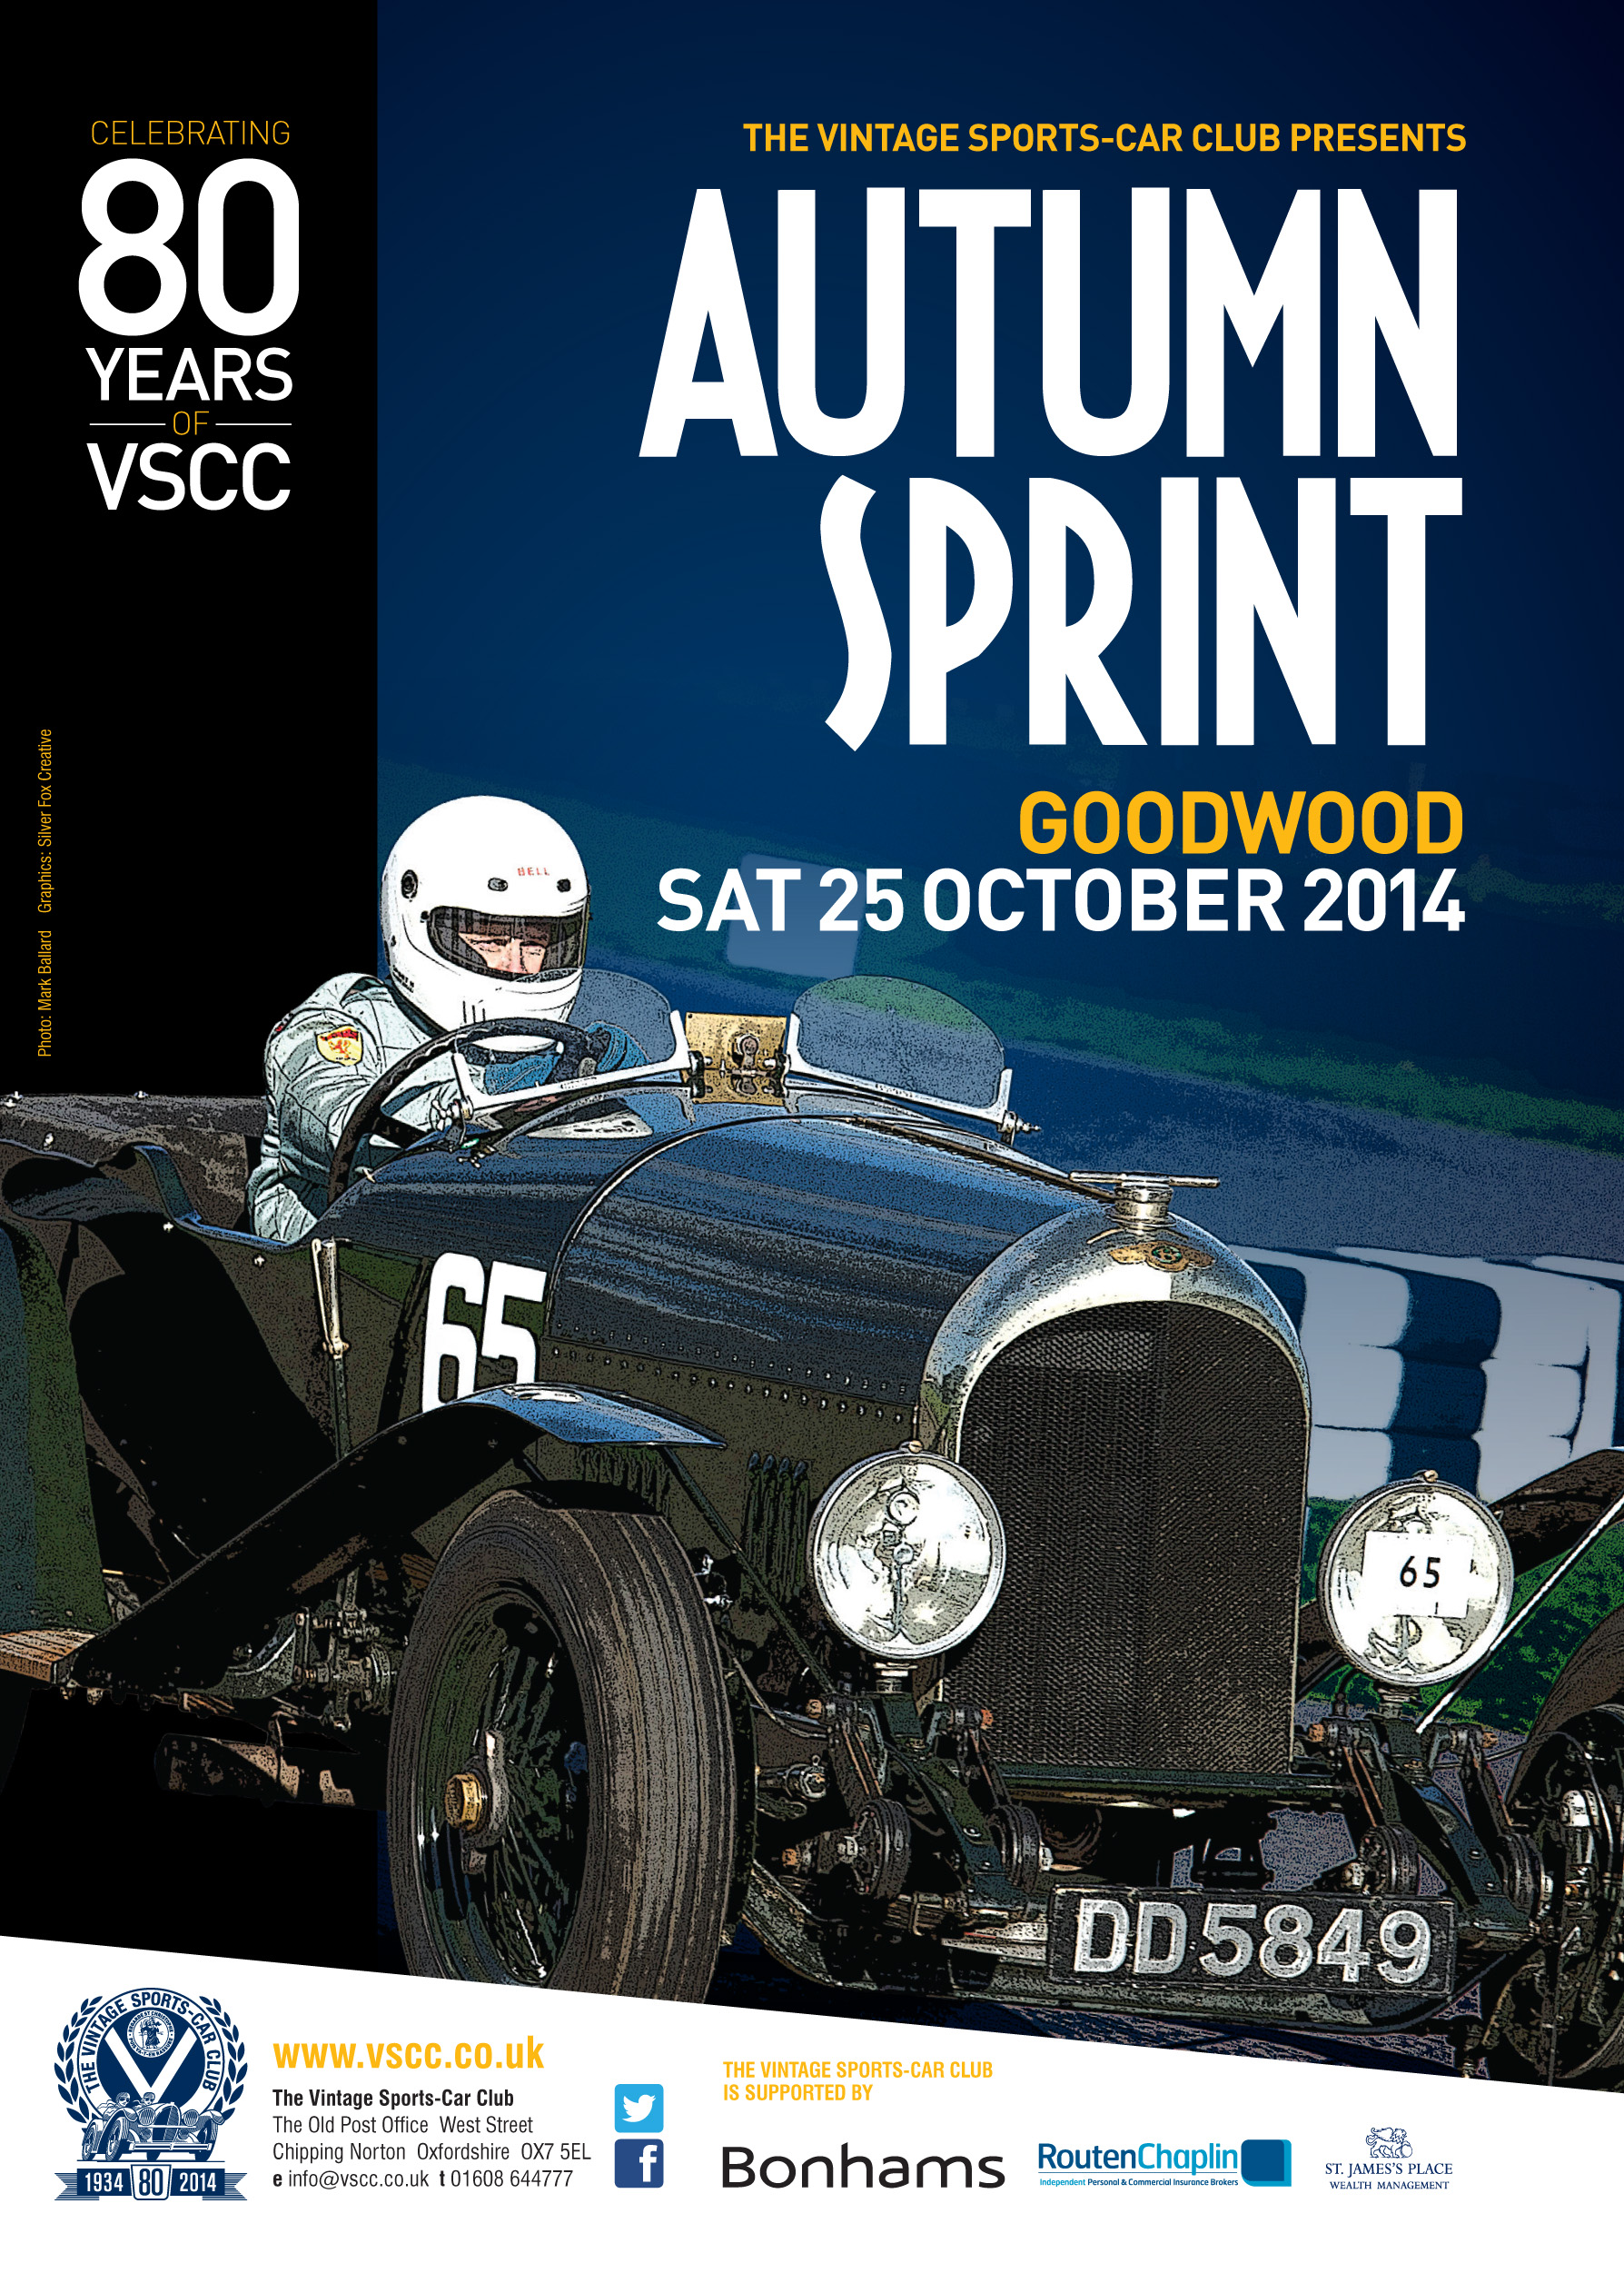 VSCC Speed Season draws to a close at Goodwood this weekend cover